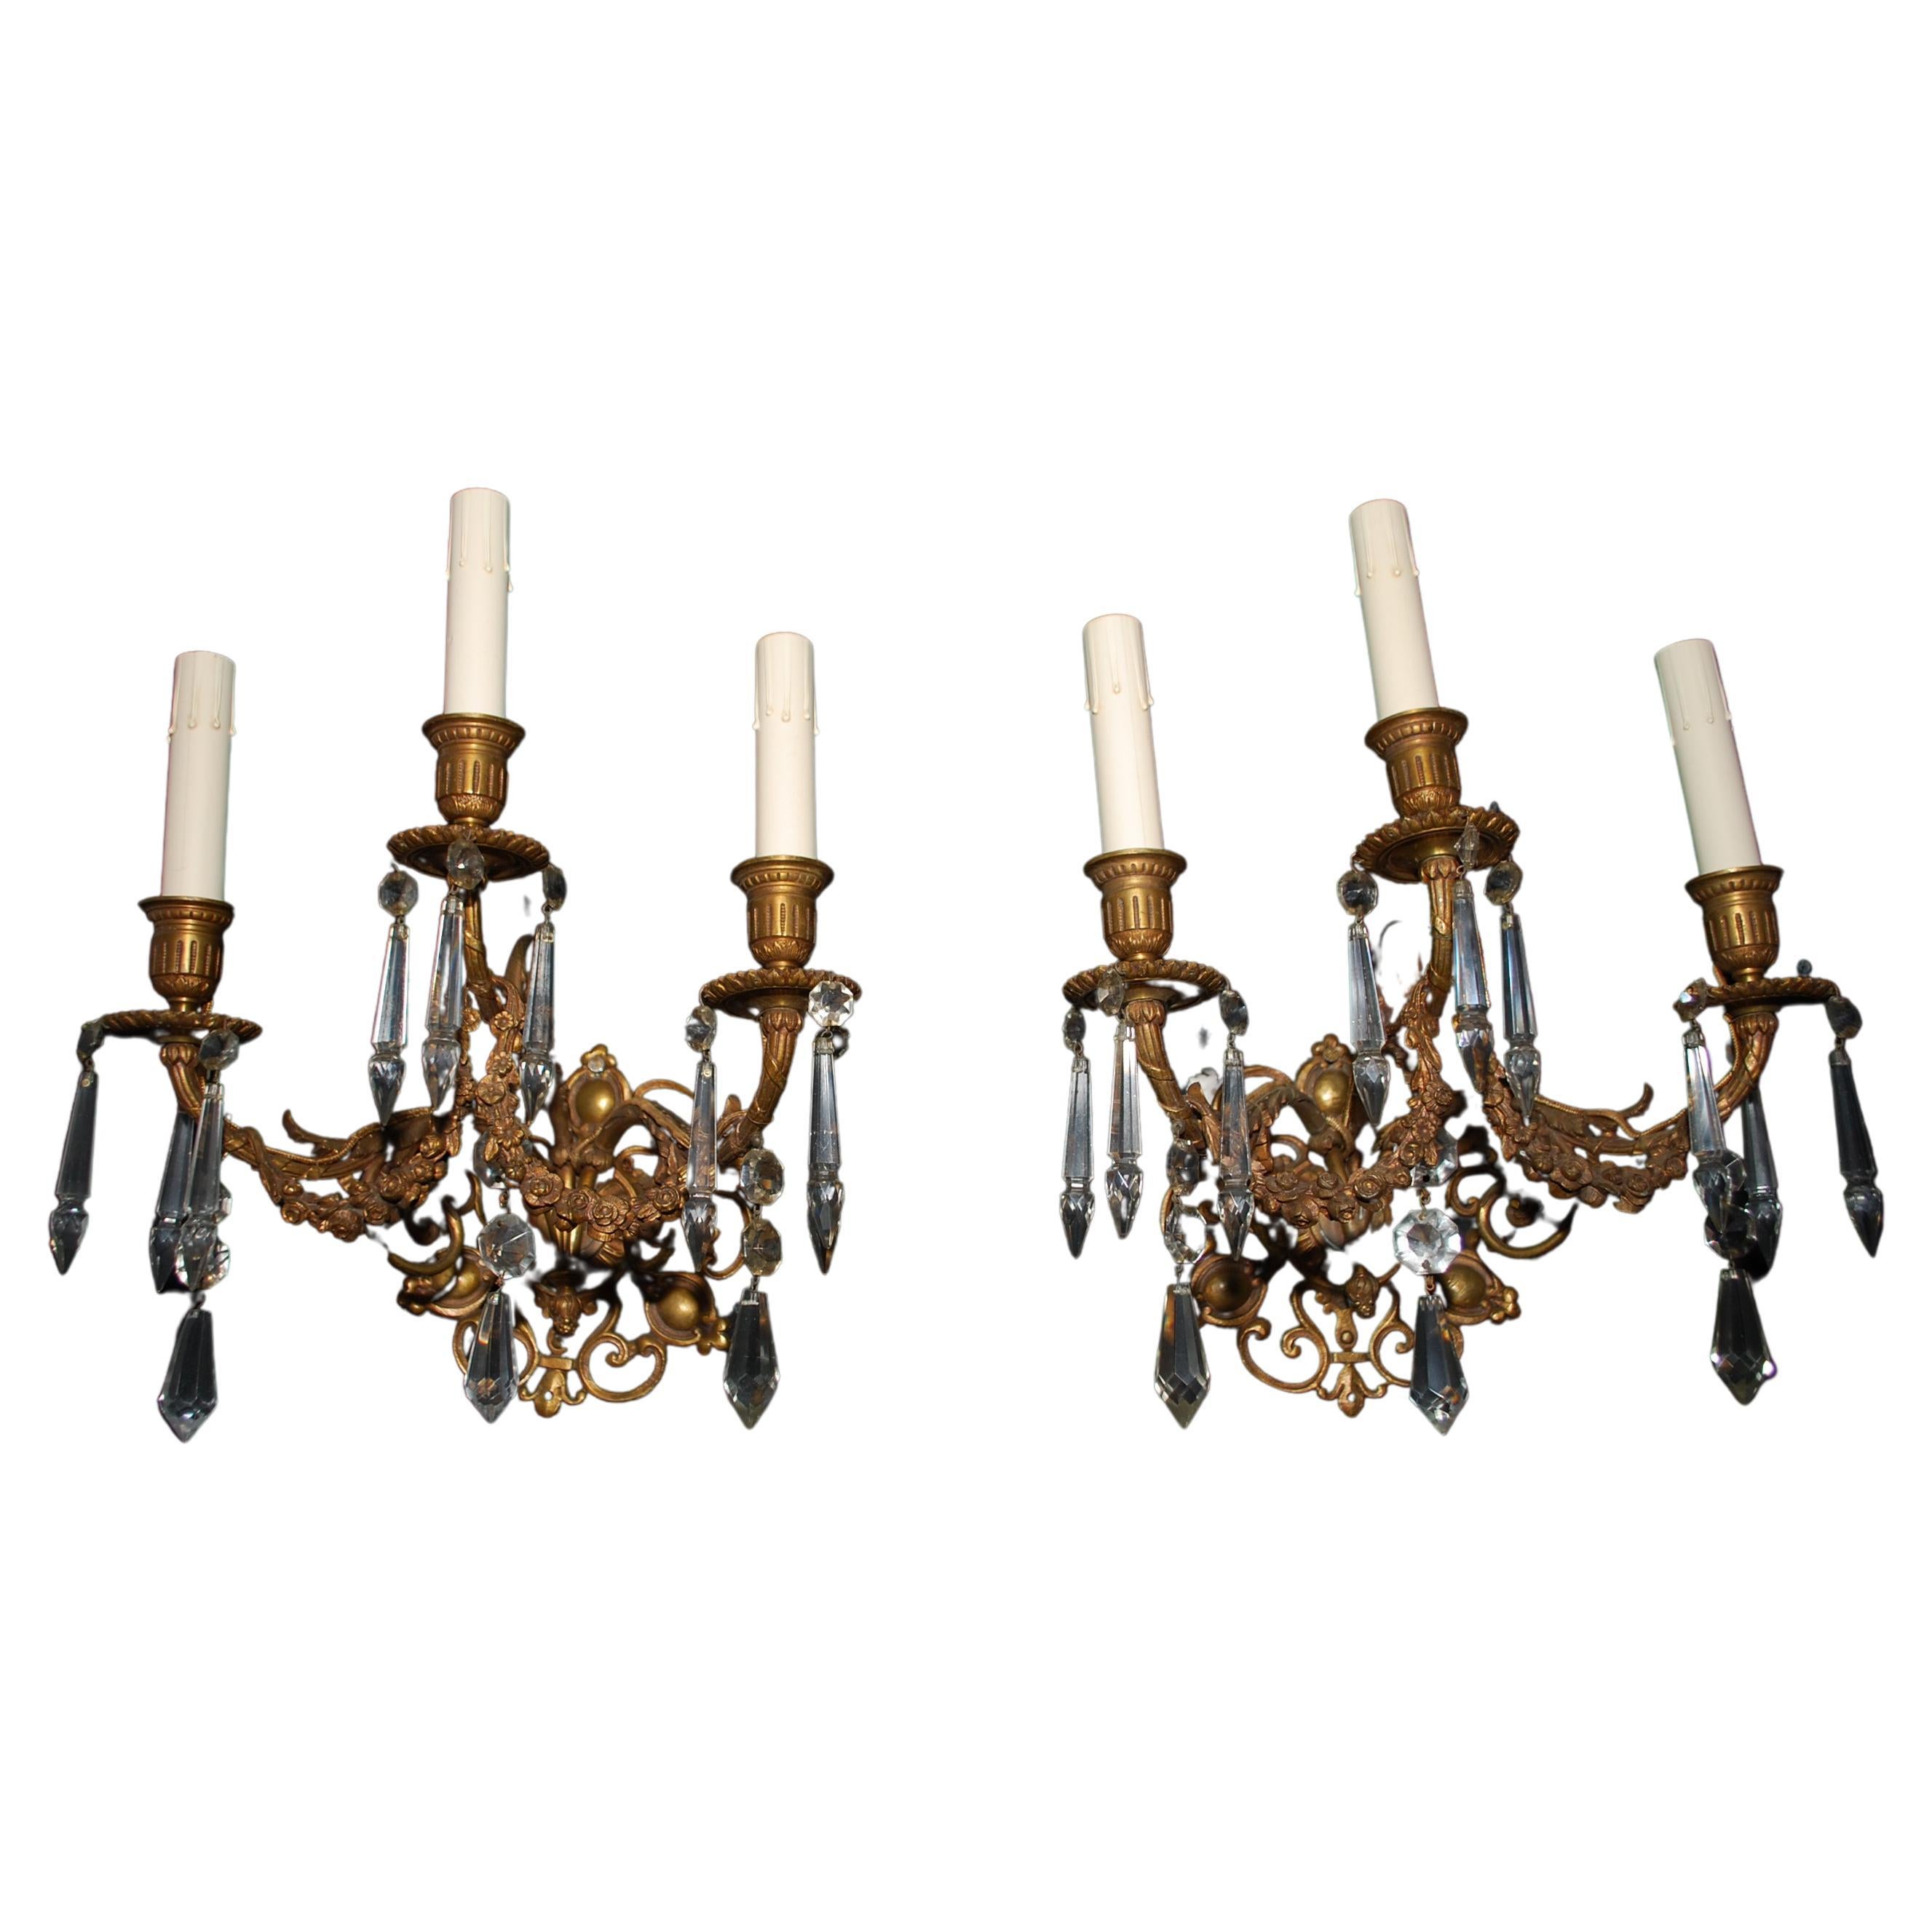 Beautiful and Elegant Pair of Late 19th Century French Bronze Sconces